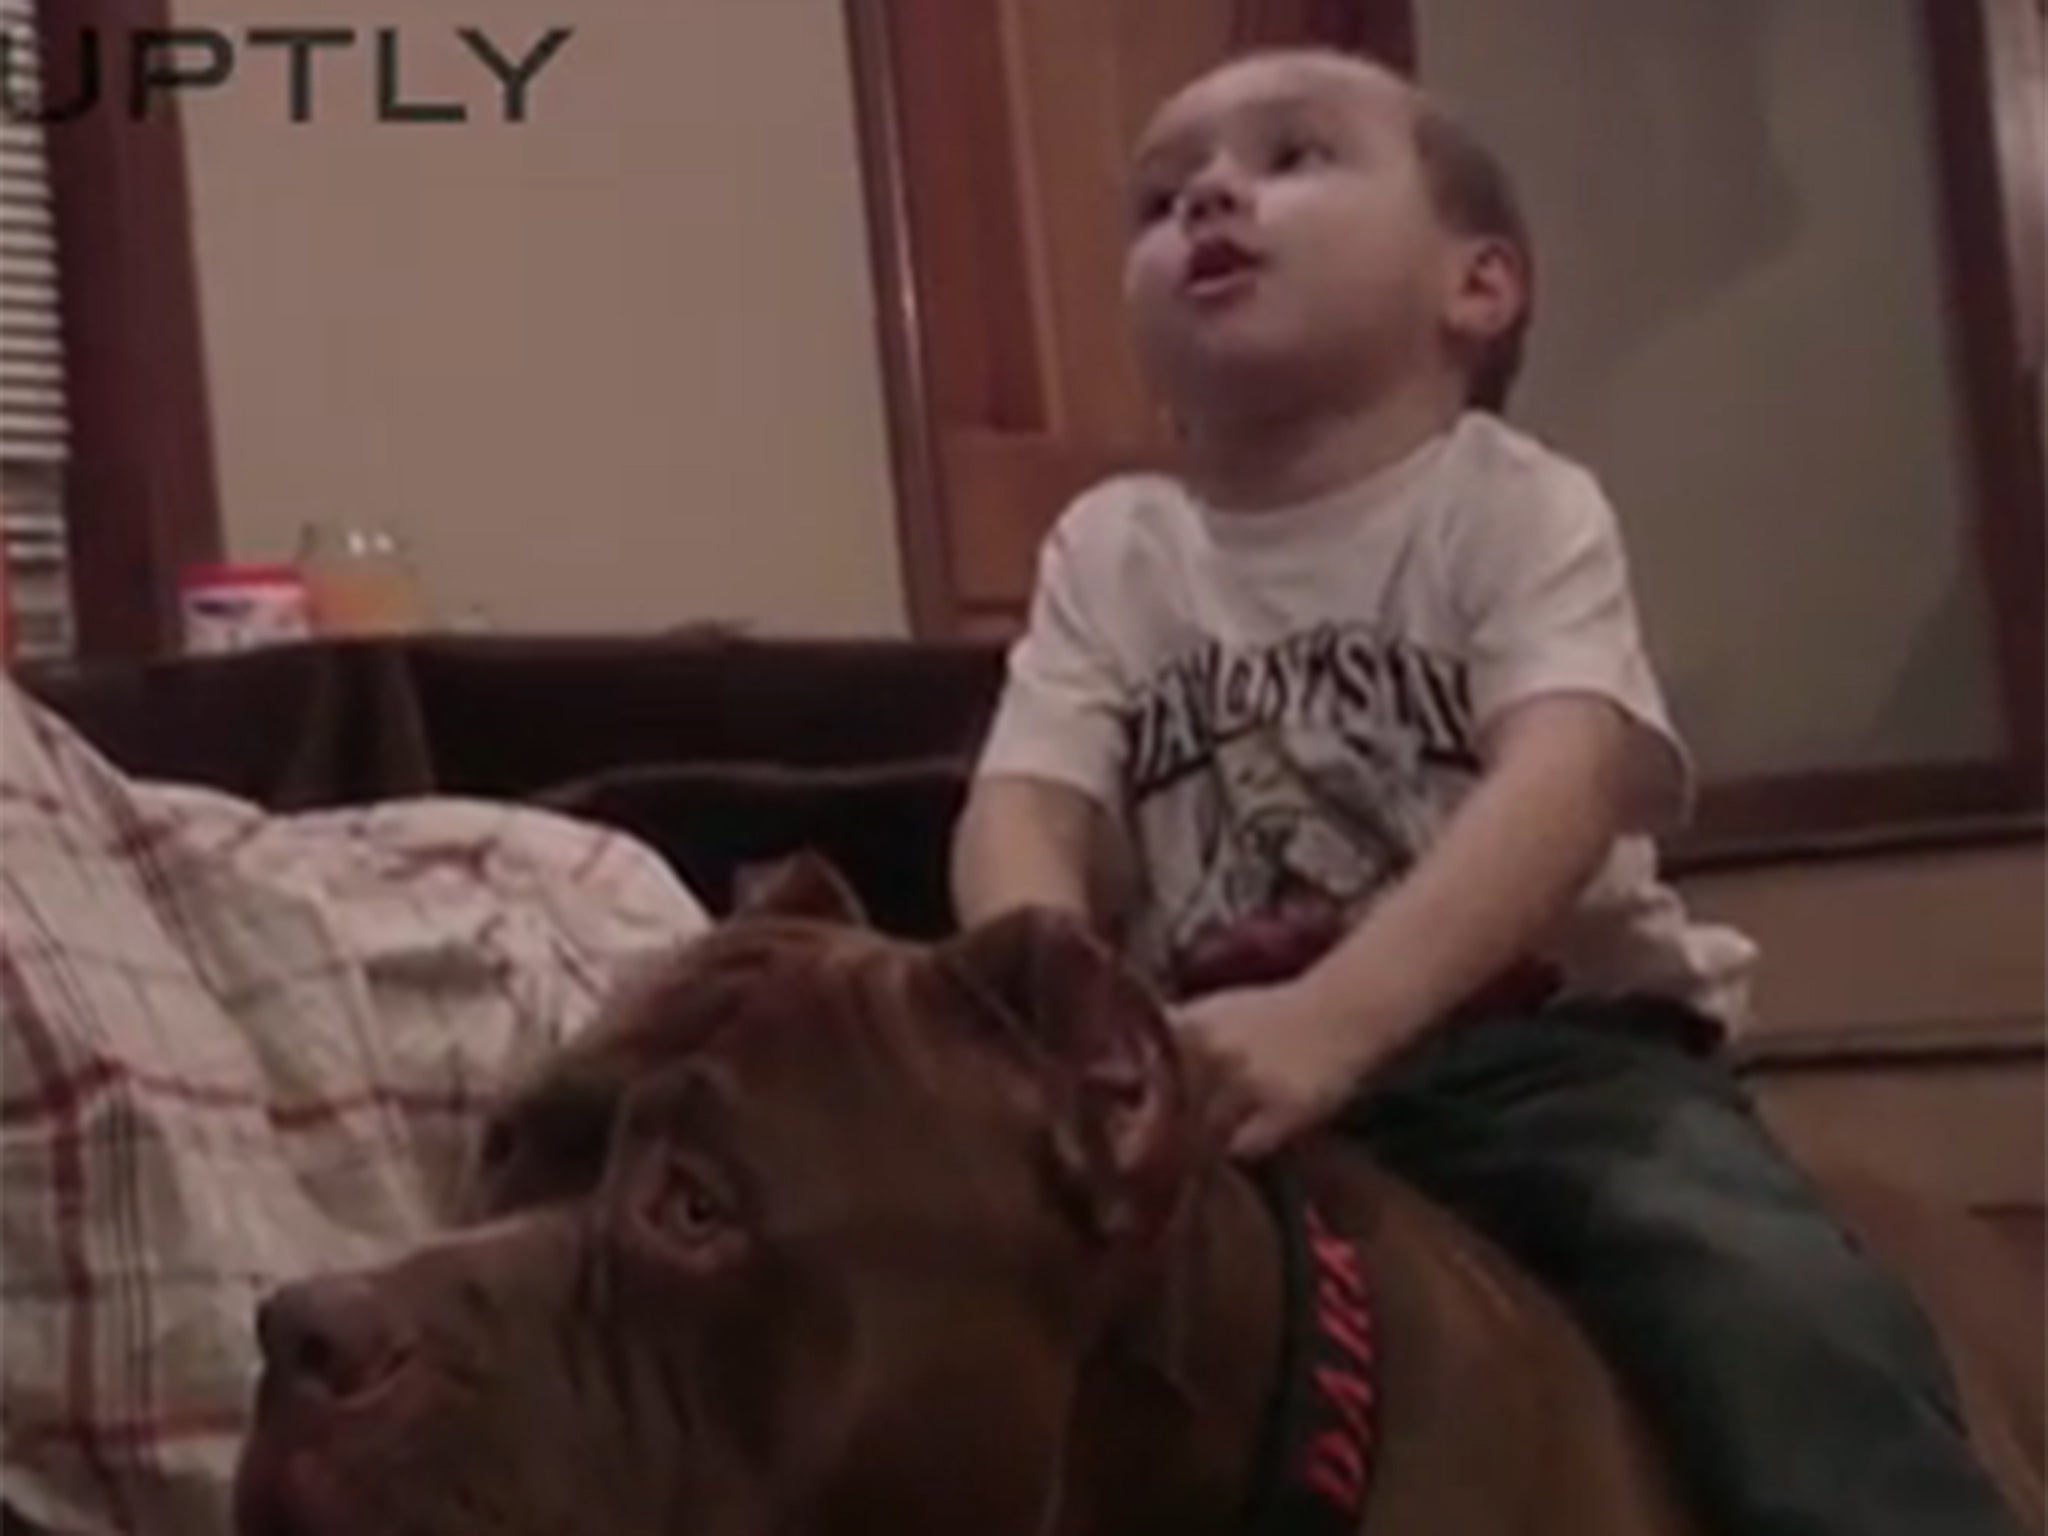 Hulk the pit bull with the Grannans' son